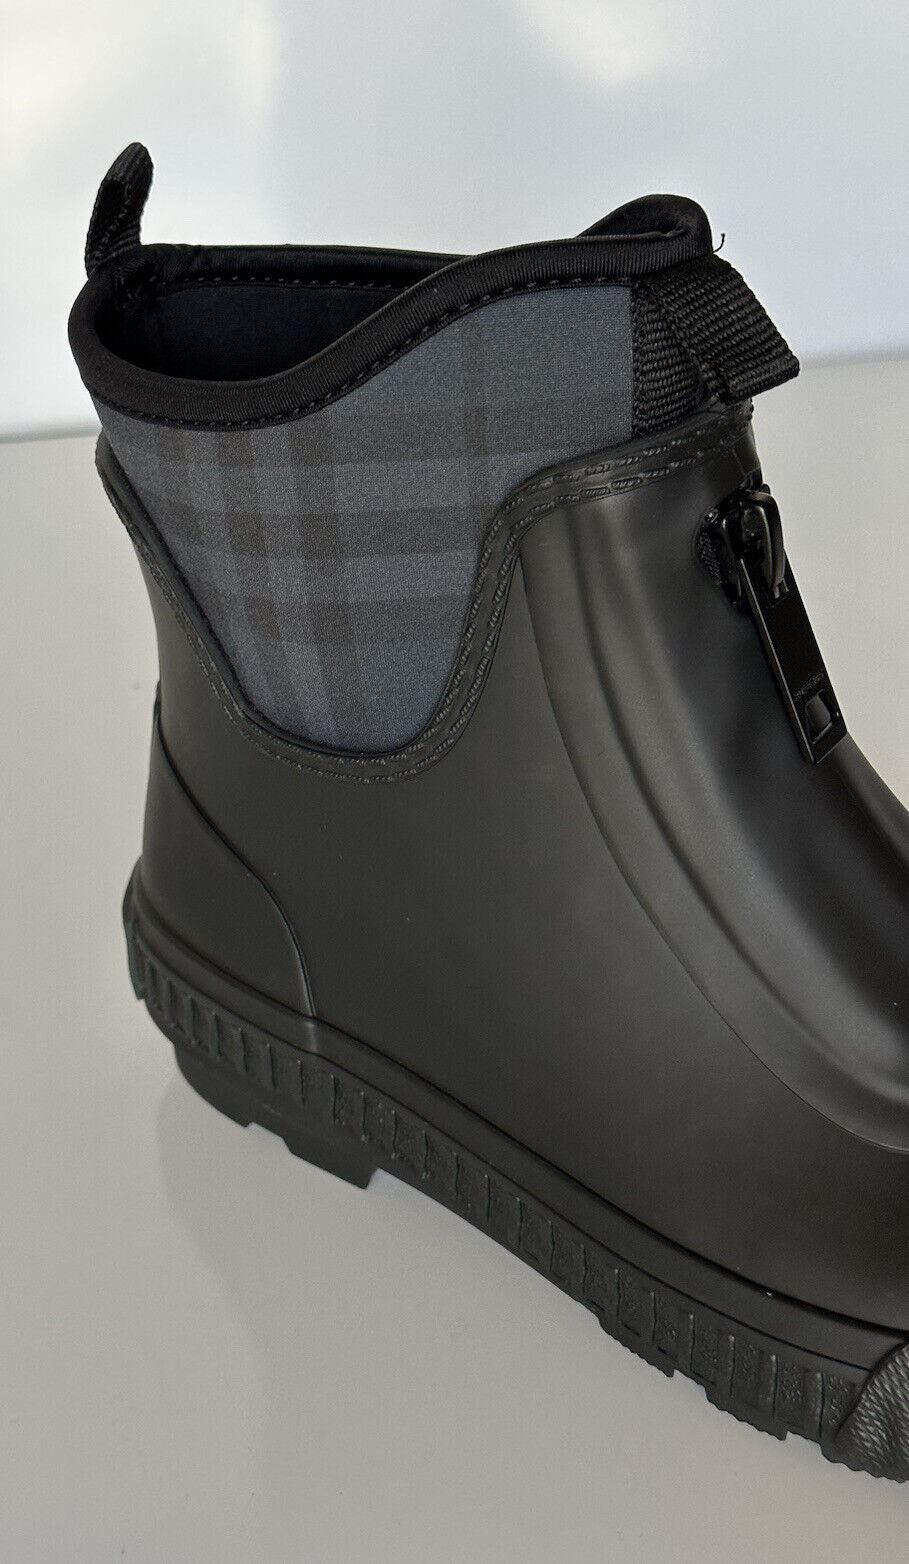 NIB Burberry Rubber  Women's Black/Charcoal Ankle Boots 7 US (37 Euro) 8045835